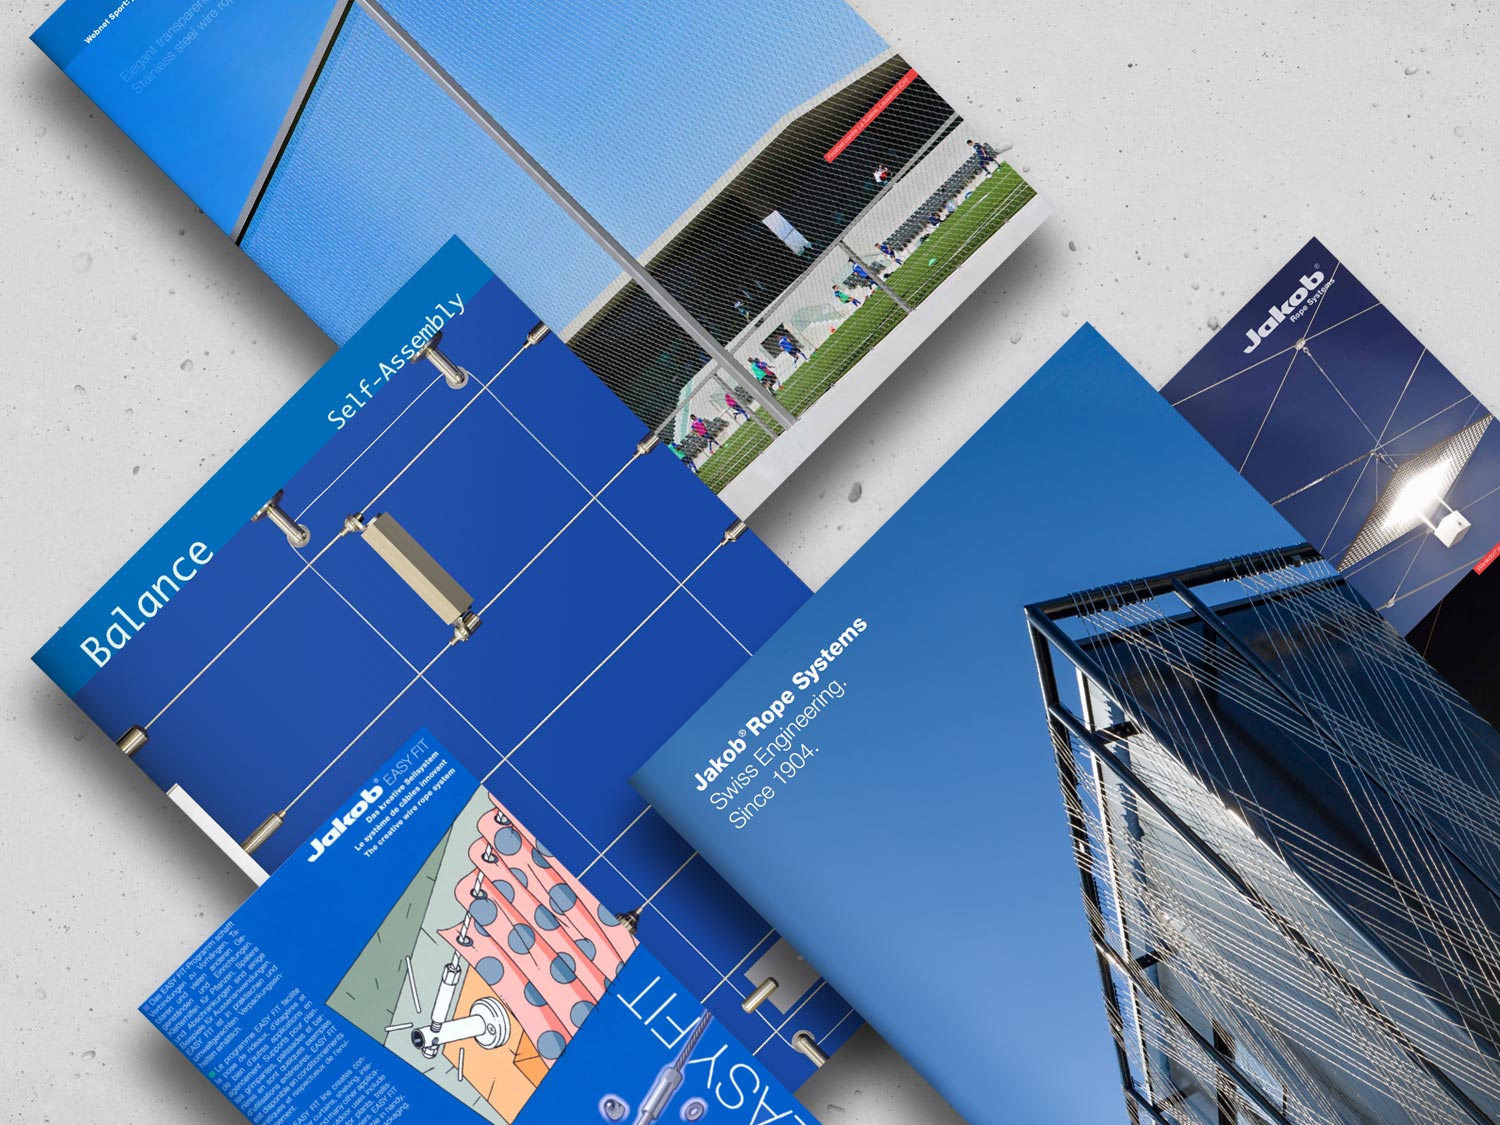 The collection of Jakob Rope Systems brochures